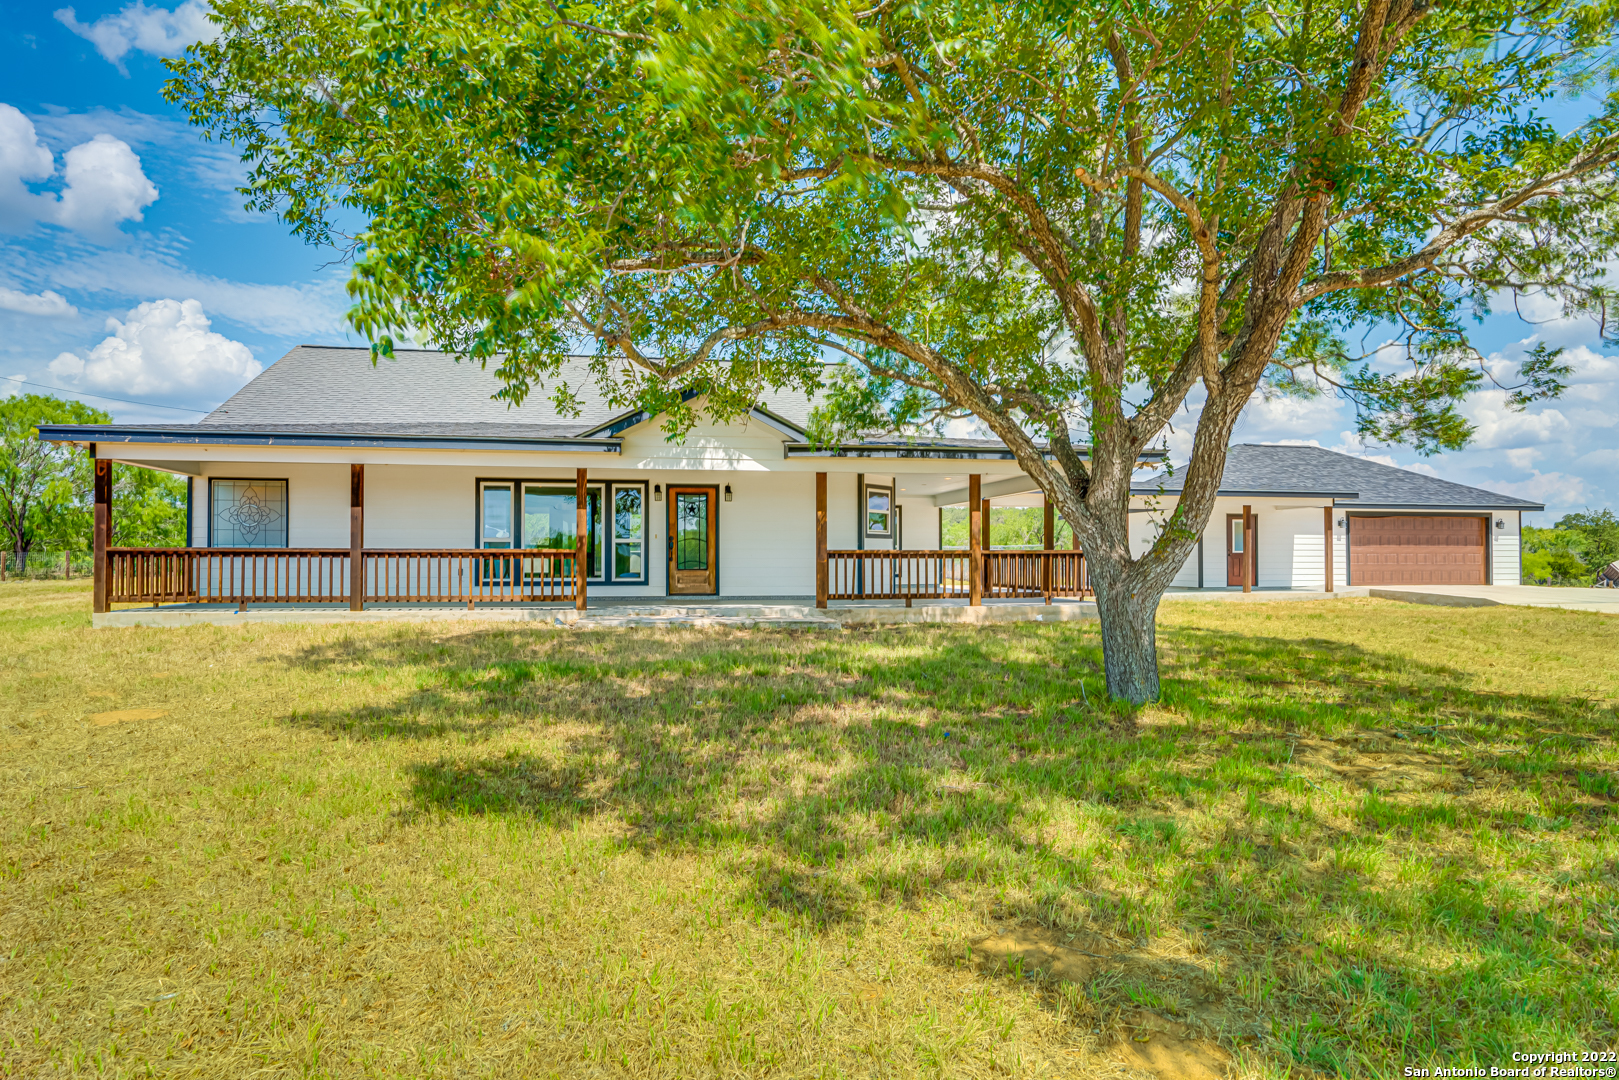 From the moment you pull into the driveway, it's immediately clear you just found a special piece of Texas. Perfectly positioned on an expansive 18 acres, the lucky new owners will enjoy room to move and play along with the potential to add some of their own personal touches without restrictions. The well-designed layout offers a split floorplan boasting four bedrooms and two and a half bathrooms with beautiful flooring throughout. For those who love to cook, the well-appointed kitchen will be a dream with granite countertops and ample storage.  An abundance of natural light enhances the sense of space plus you can bask in the stunning sunsets each day from the western-facing wrap around porch. Relish the peace and privacy of a country lifestyle while enjoying the perks of living in the highly sought-after La Vernia school district.